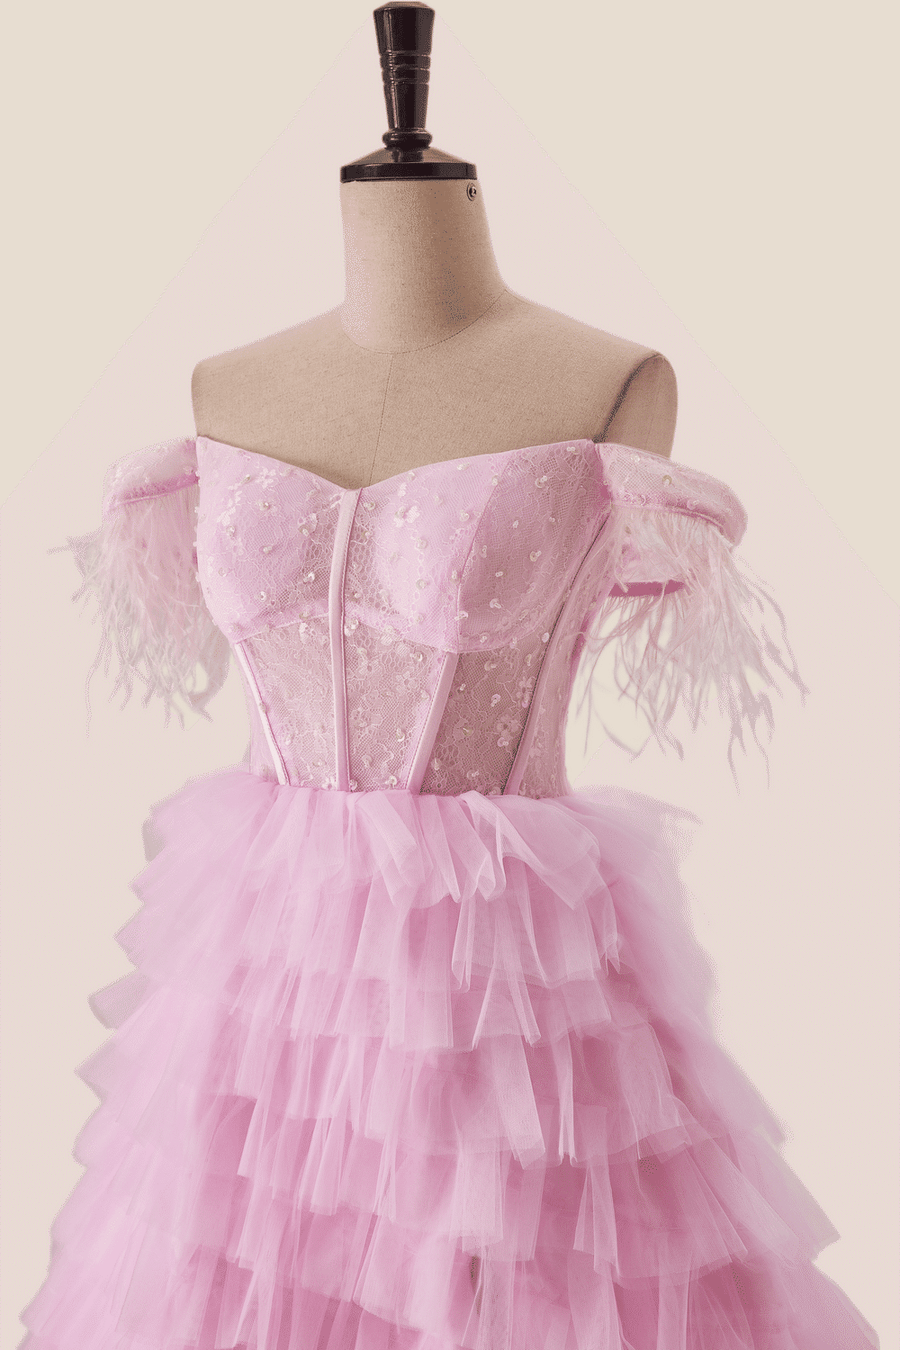 Off the Shoulder Pink Corset Tiered Ruffle Formal Gown